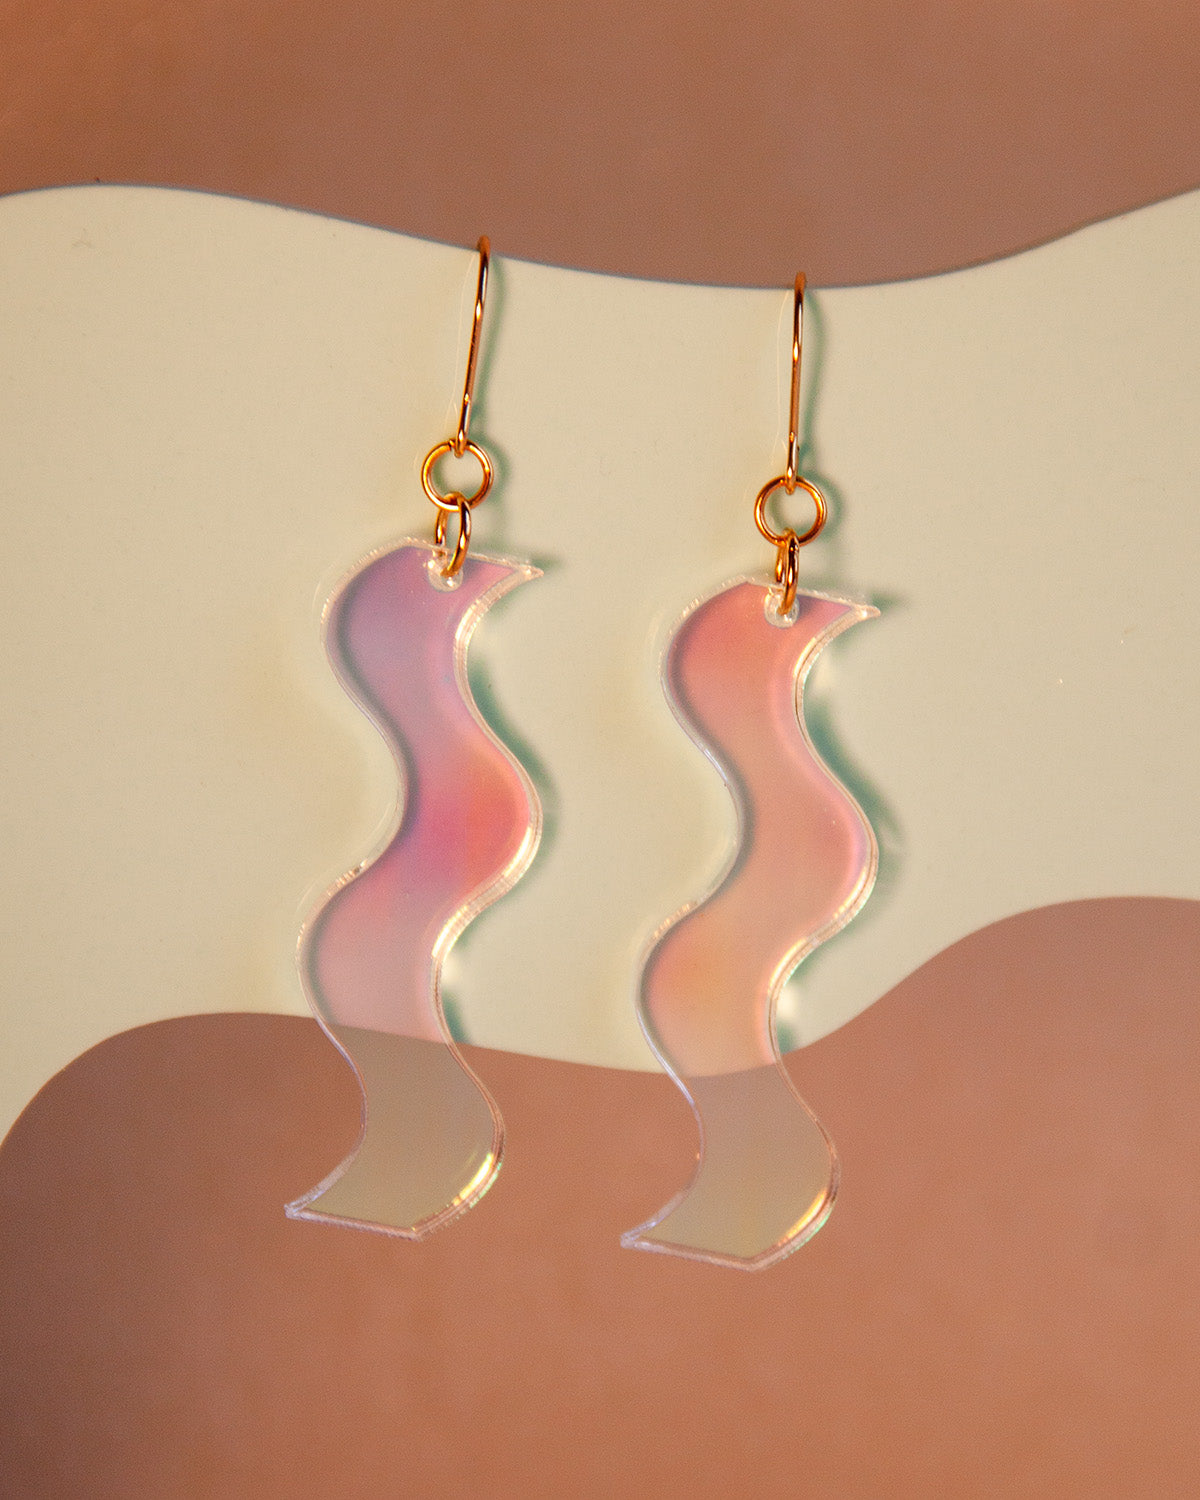 Squiggle earrings in Iridescent